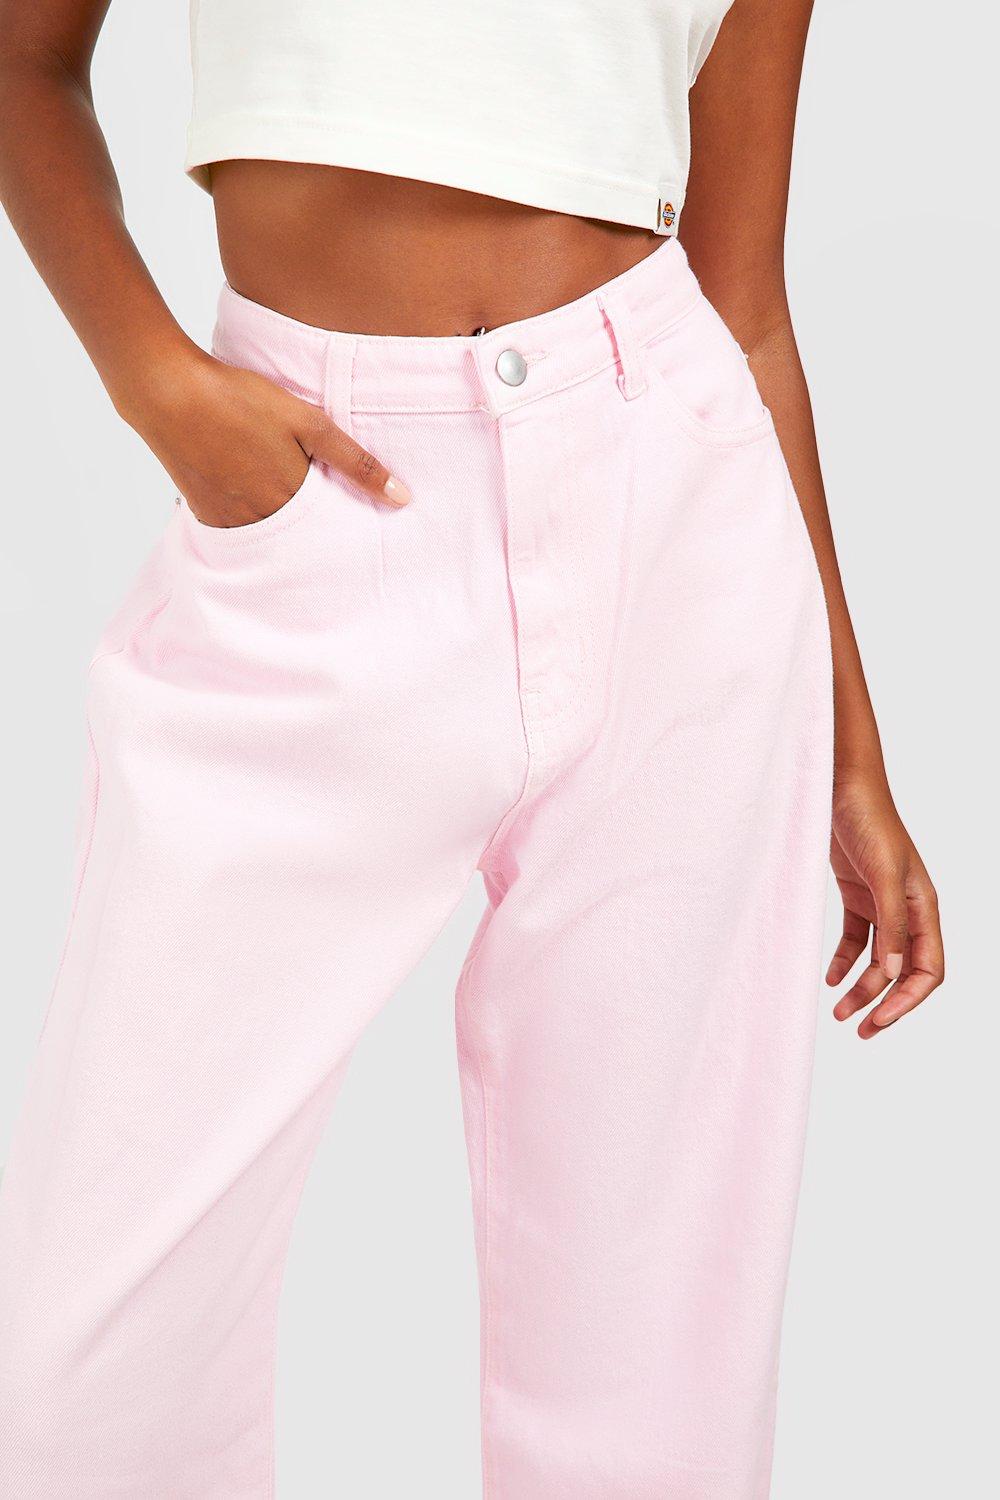 Express Super High Rise Ankle Pants Womens Size XL Pink Belted New